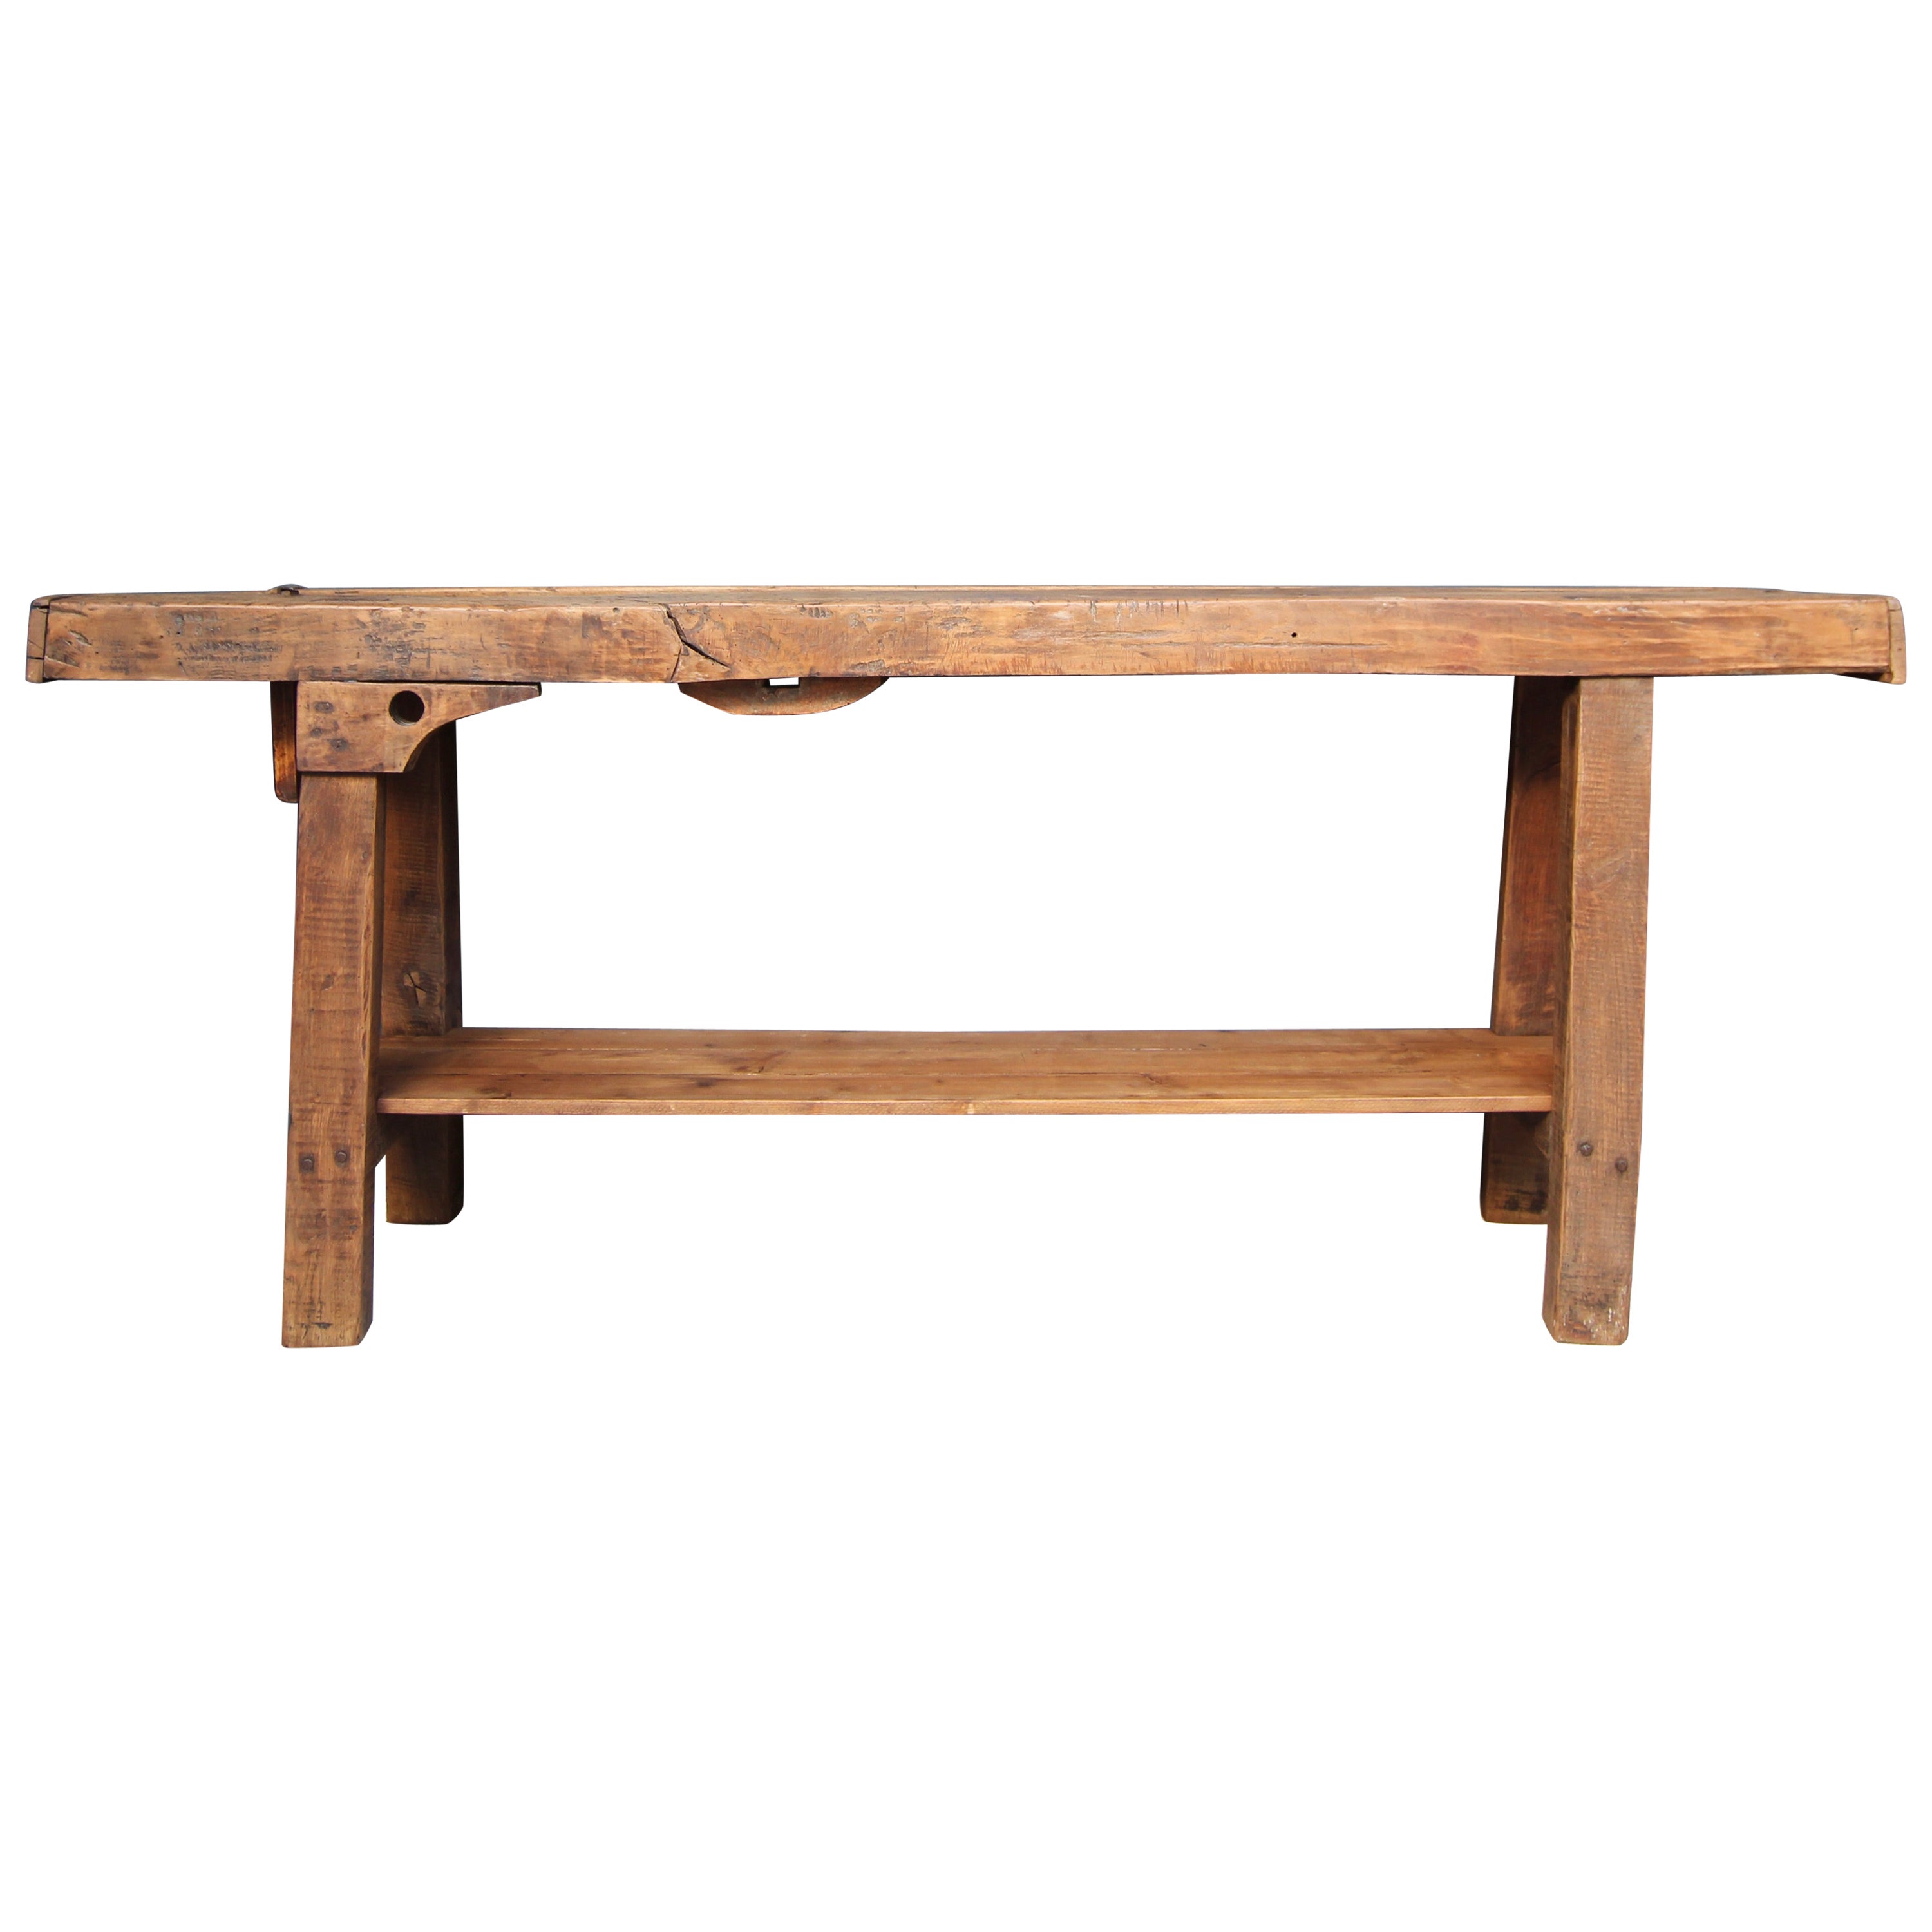 Early 20th Century Rustic French Industrial Workbench Console Table